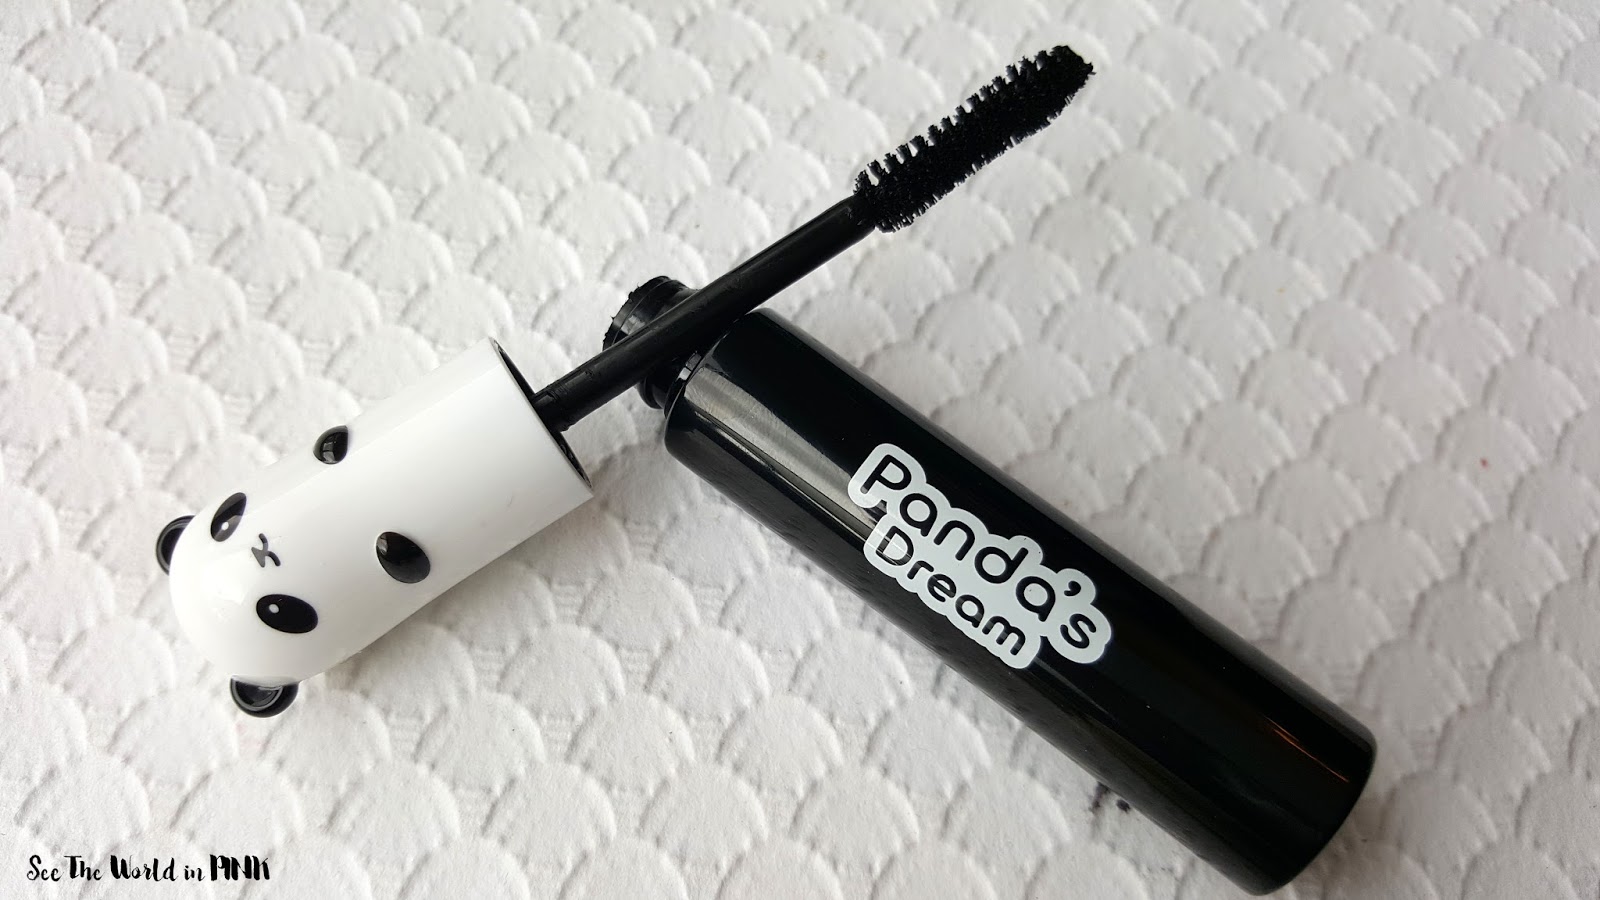 Tony Moly Panda's Dream Smudge Out Mascara Volume - Cutest Mascara Ever, But Does It Work?!